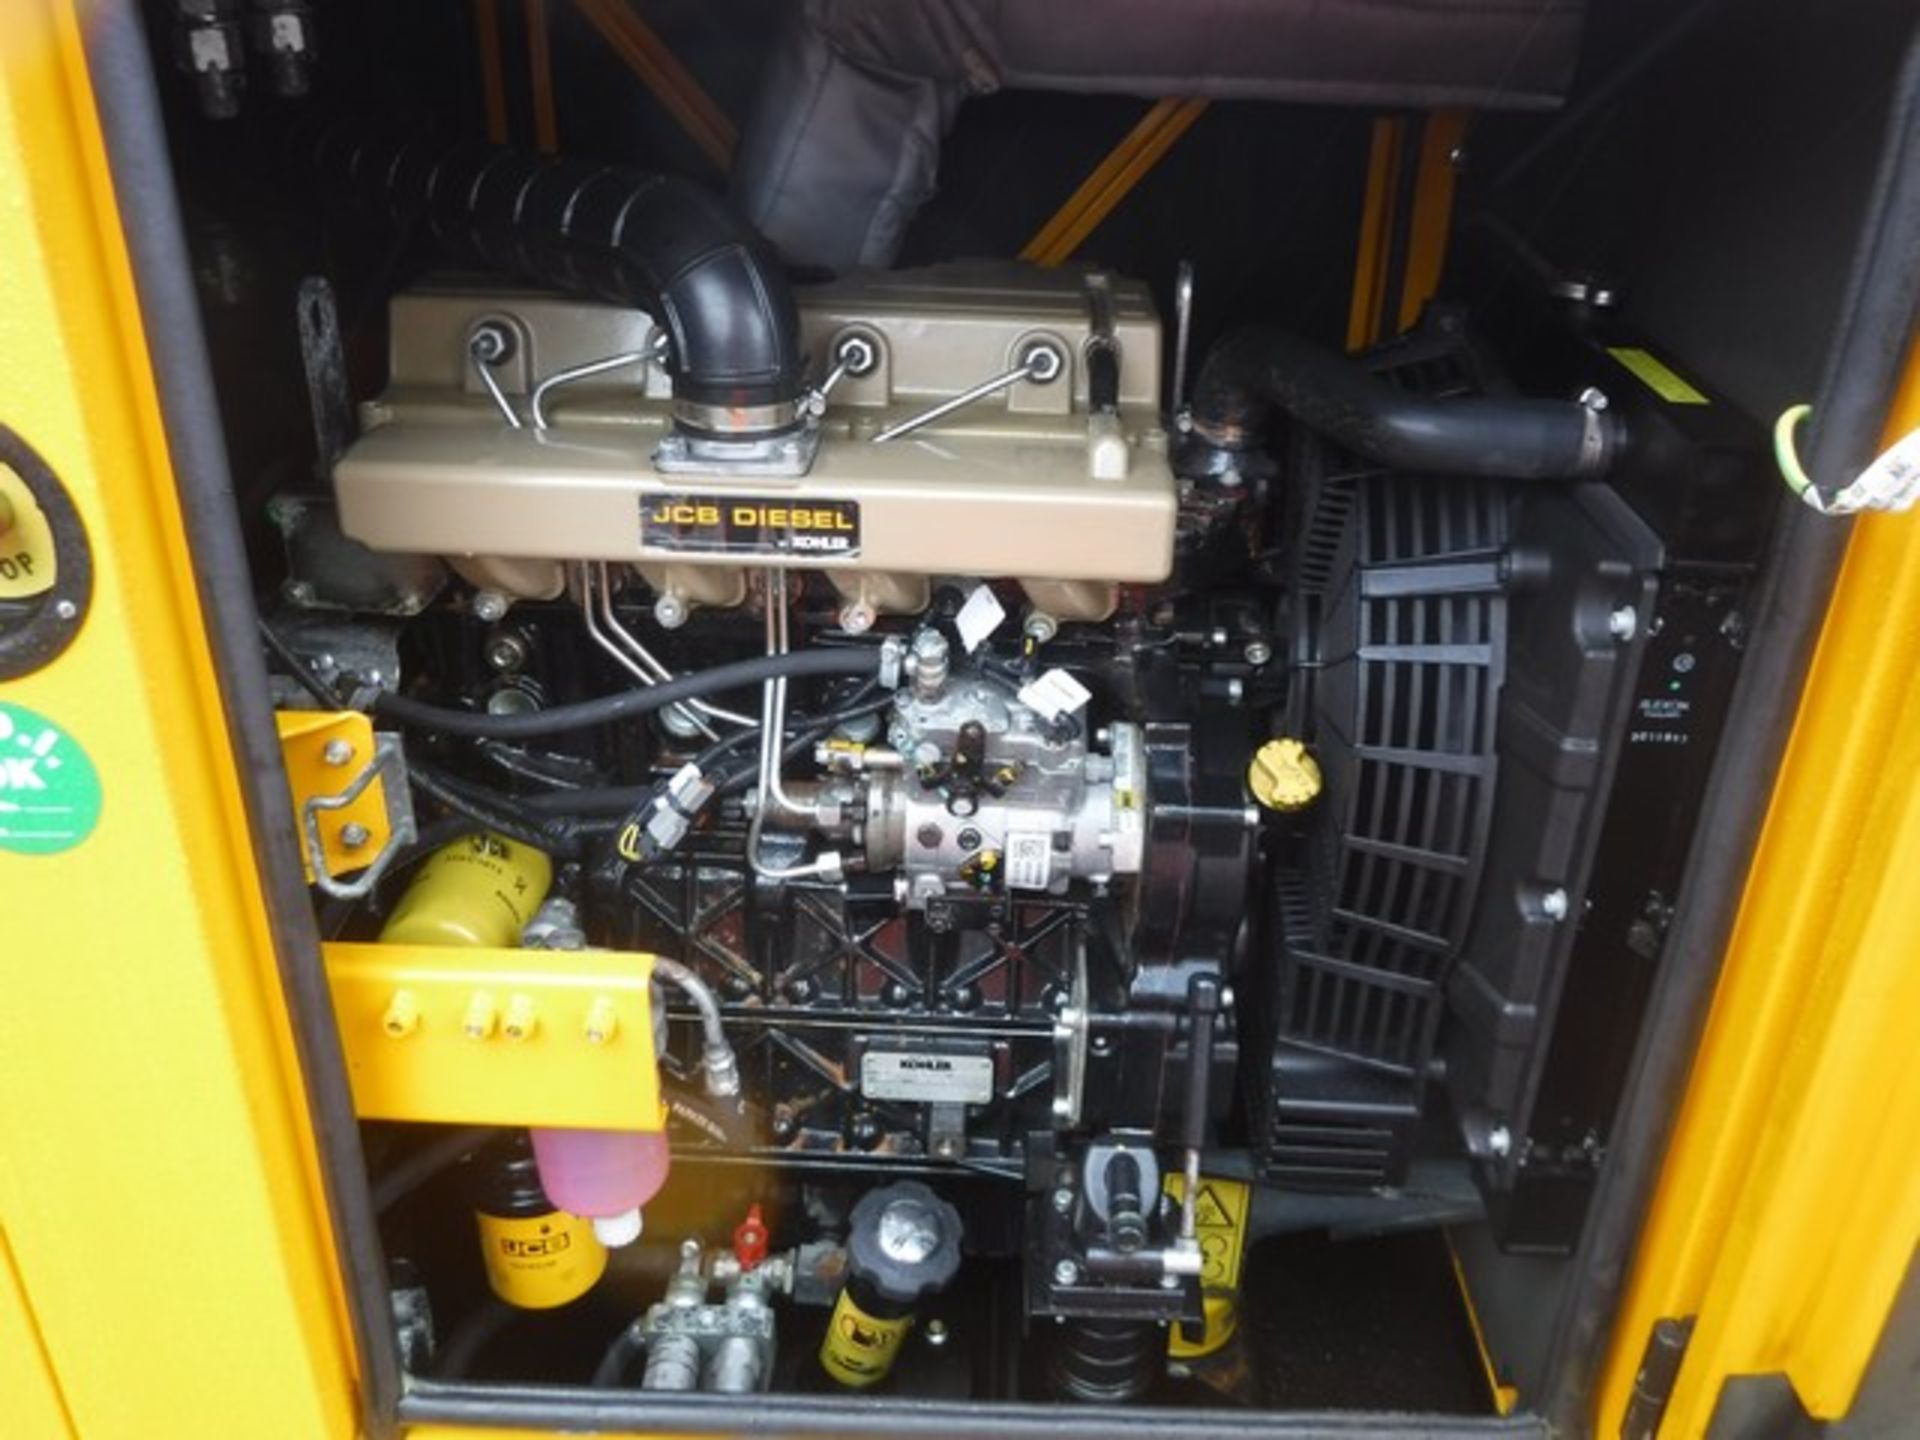 2017 JCB G27QS generator 24.5KVA rate power engine no 4701300610 1081hrs (not verified) - Image 8 of 11